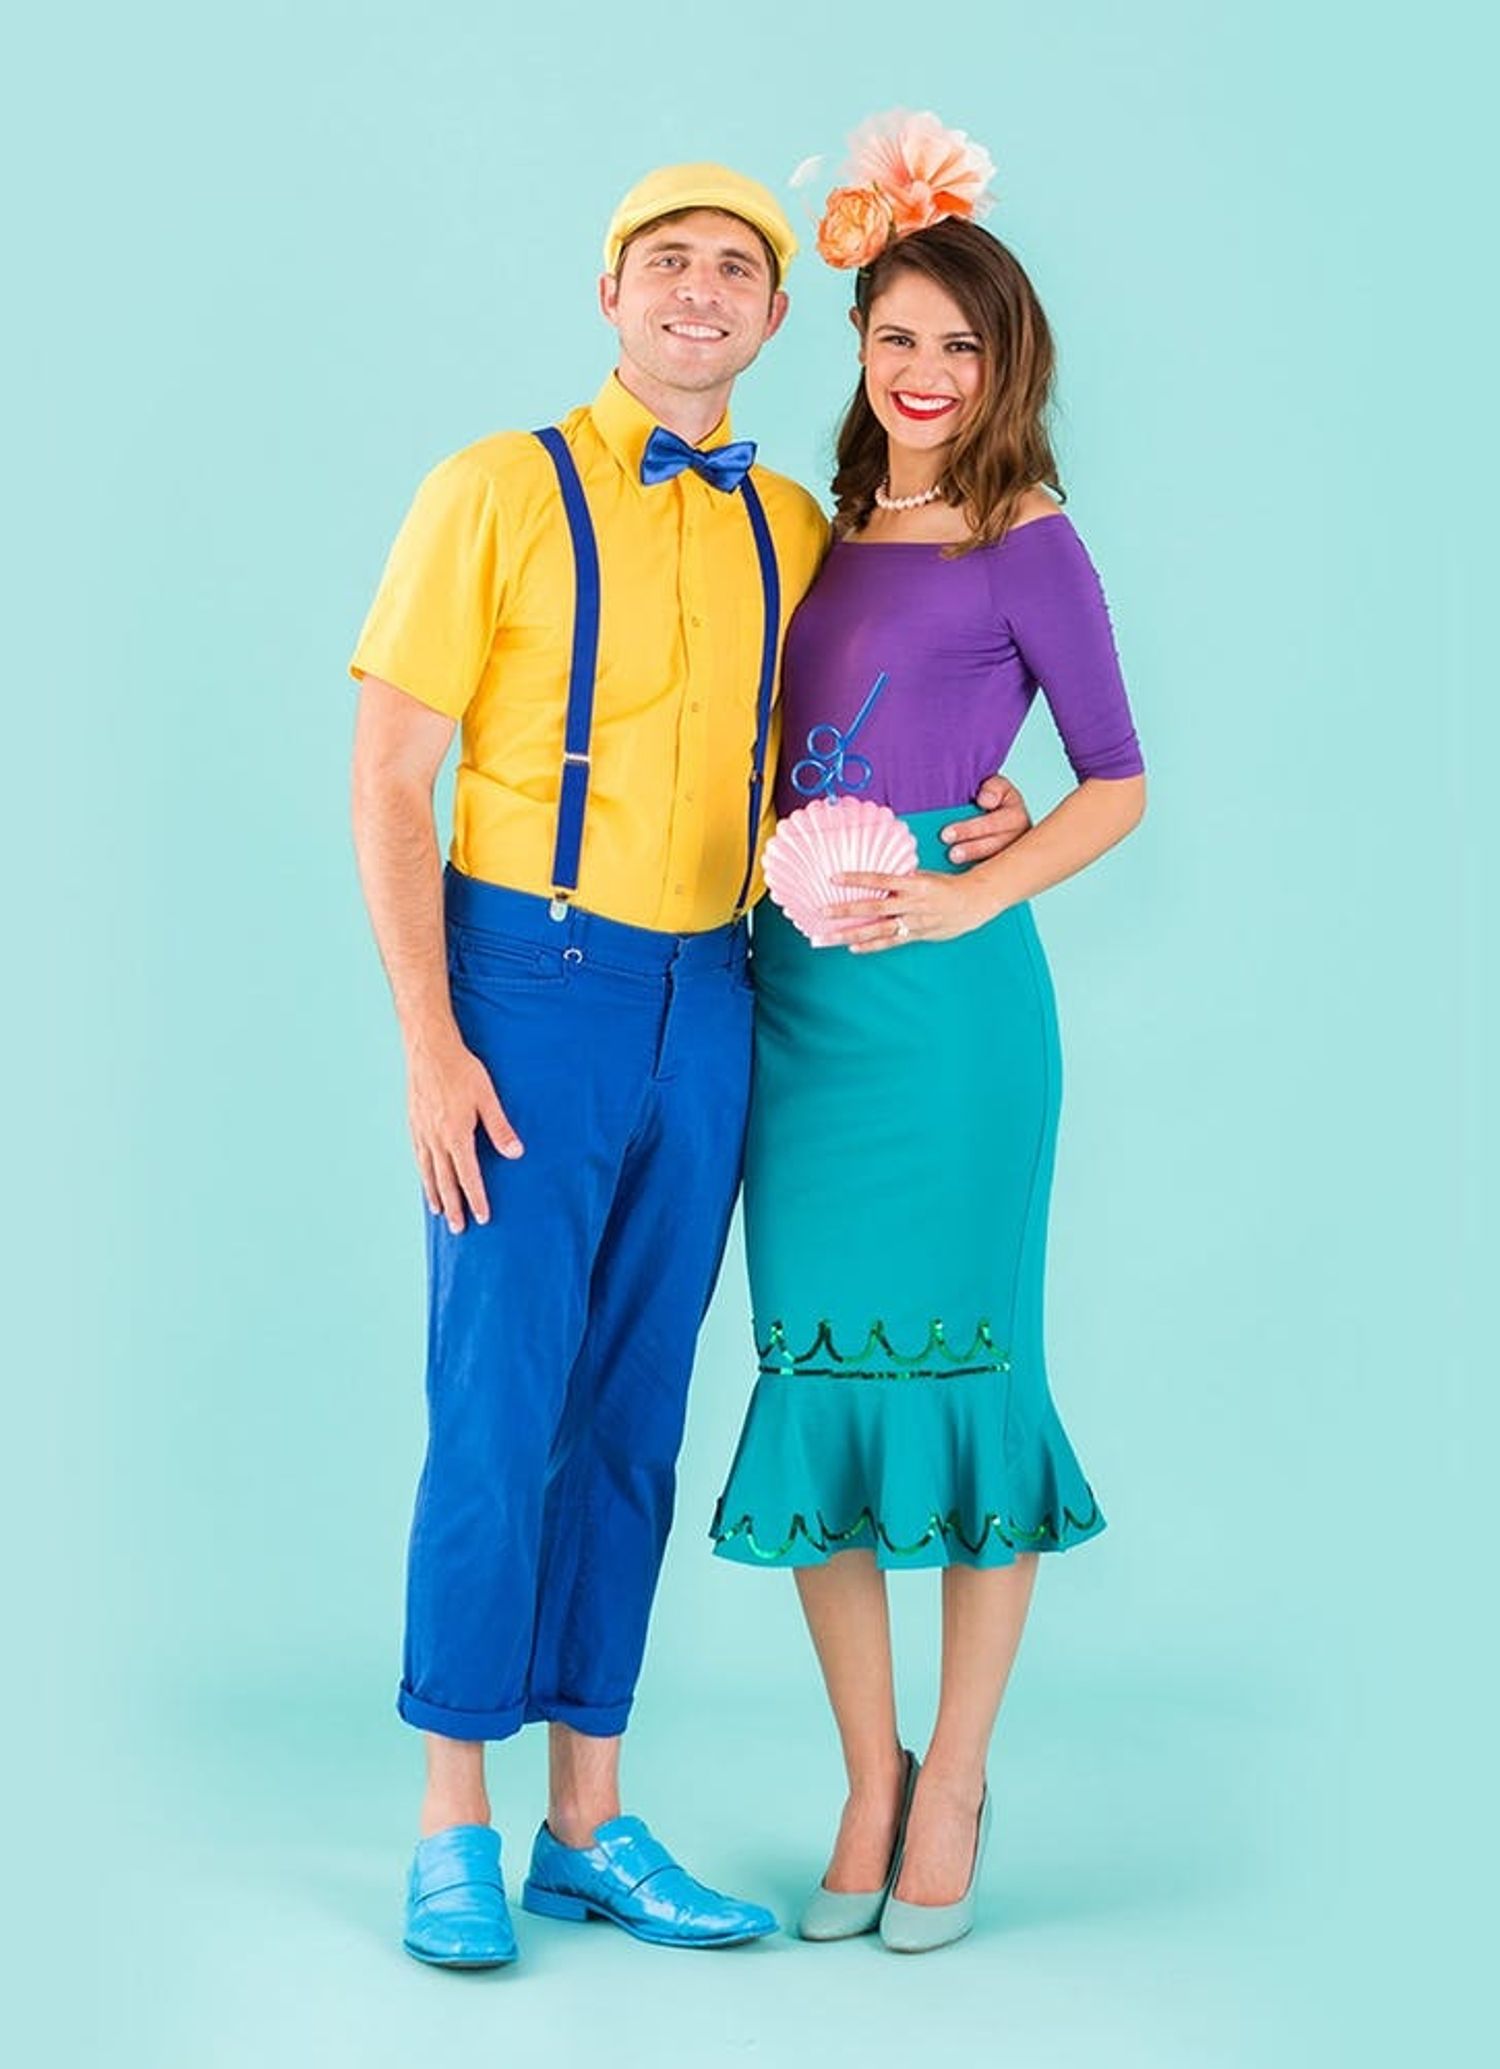 These 4 Dapper Disney Couples Costumes Will Give You a Magical ...